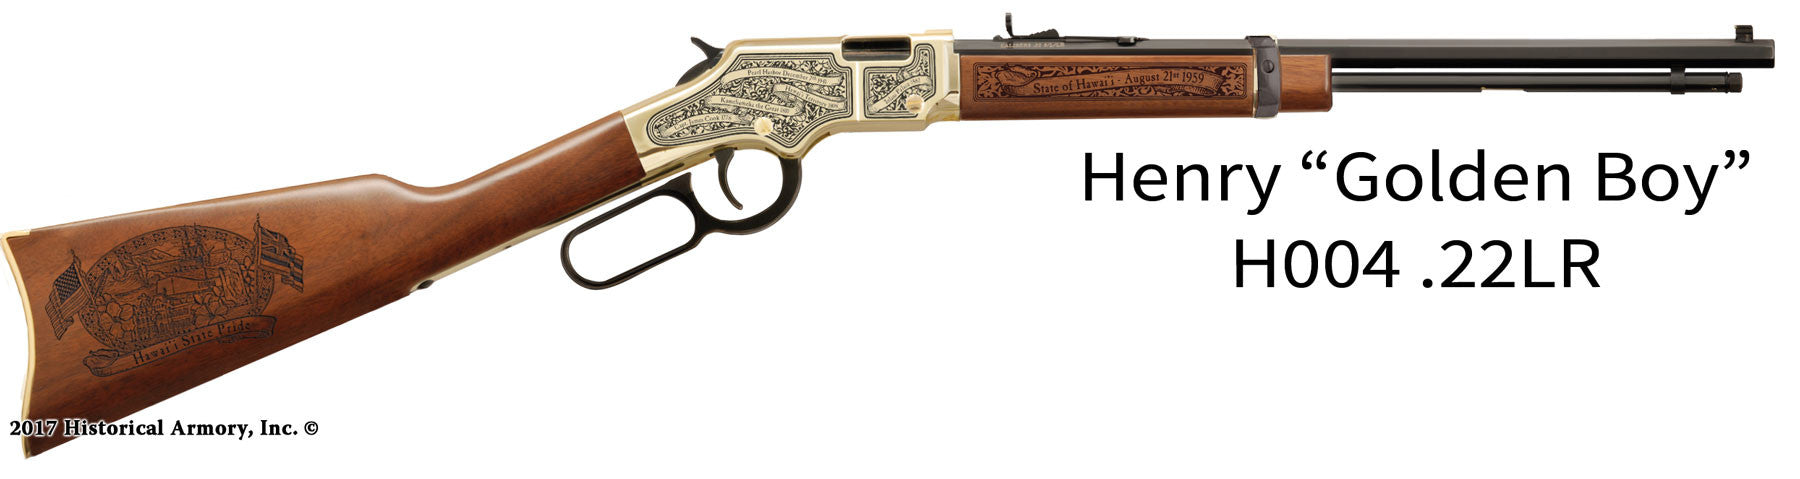 Hawaii State Pride Engraved Golden Boy Henry Rifle